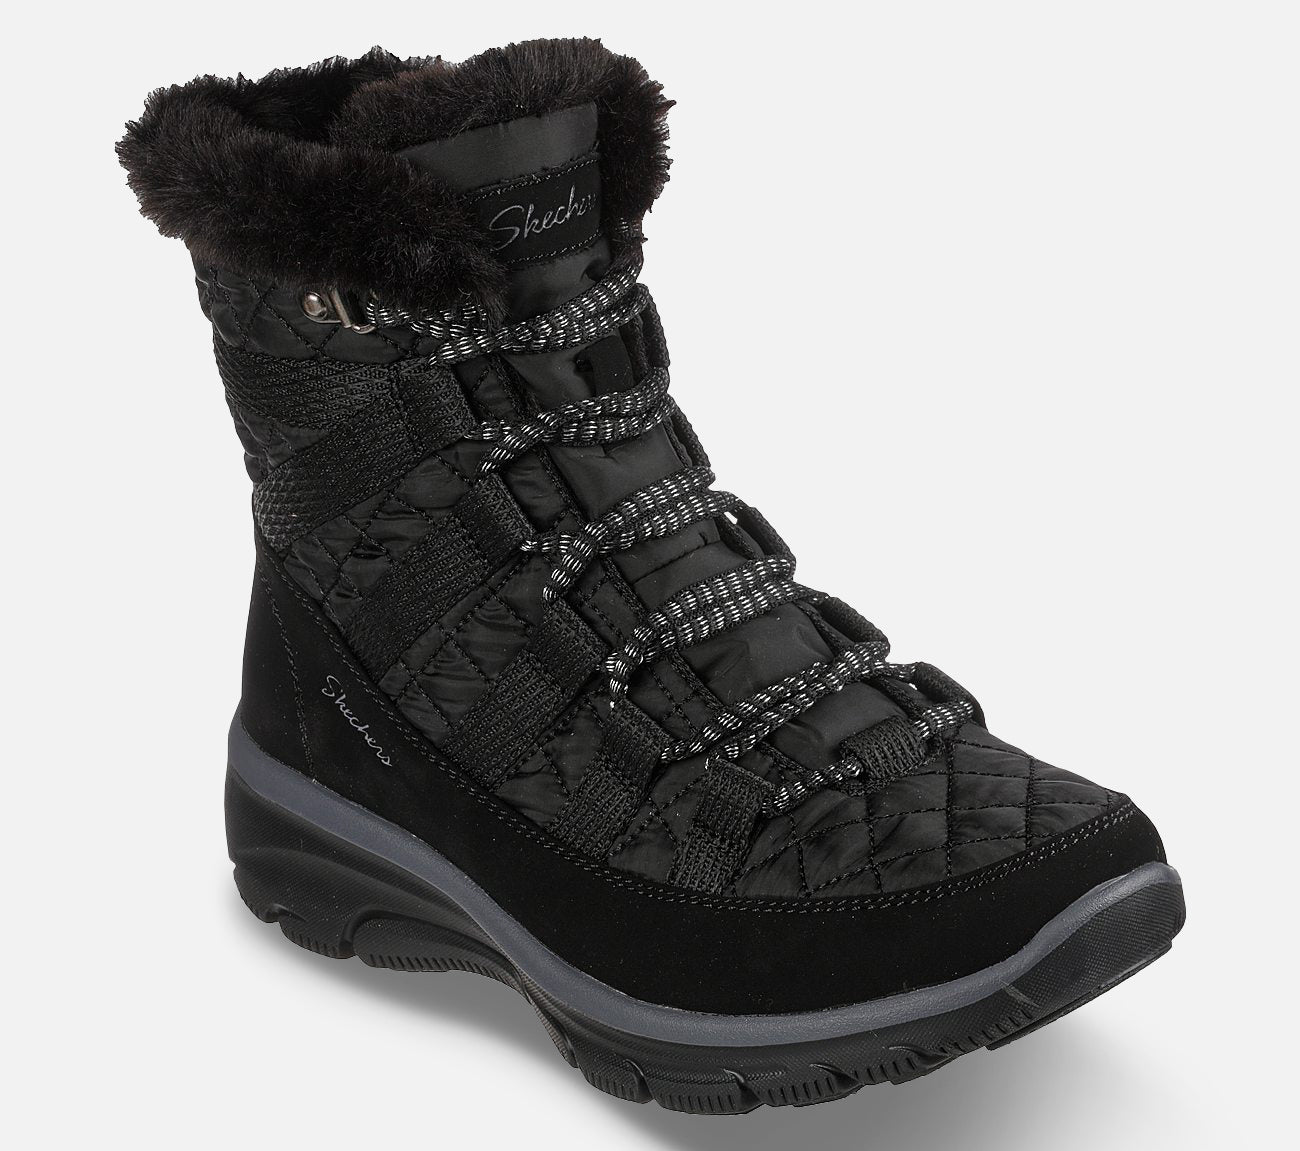 Relaxed Fit - Easy Going Boot Skechers